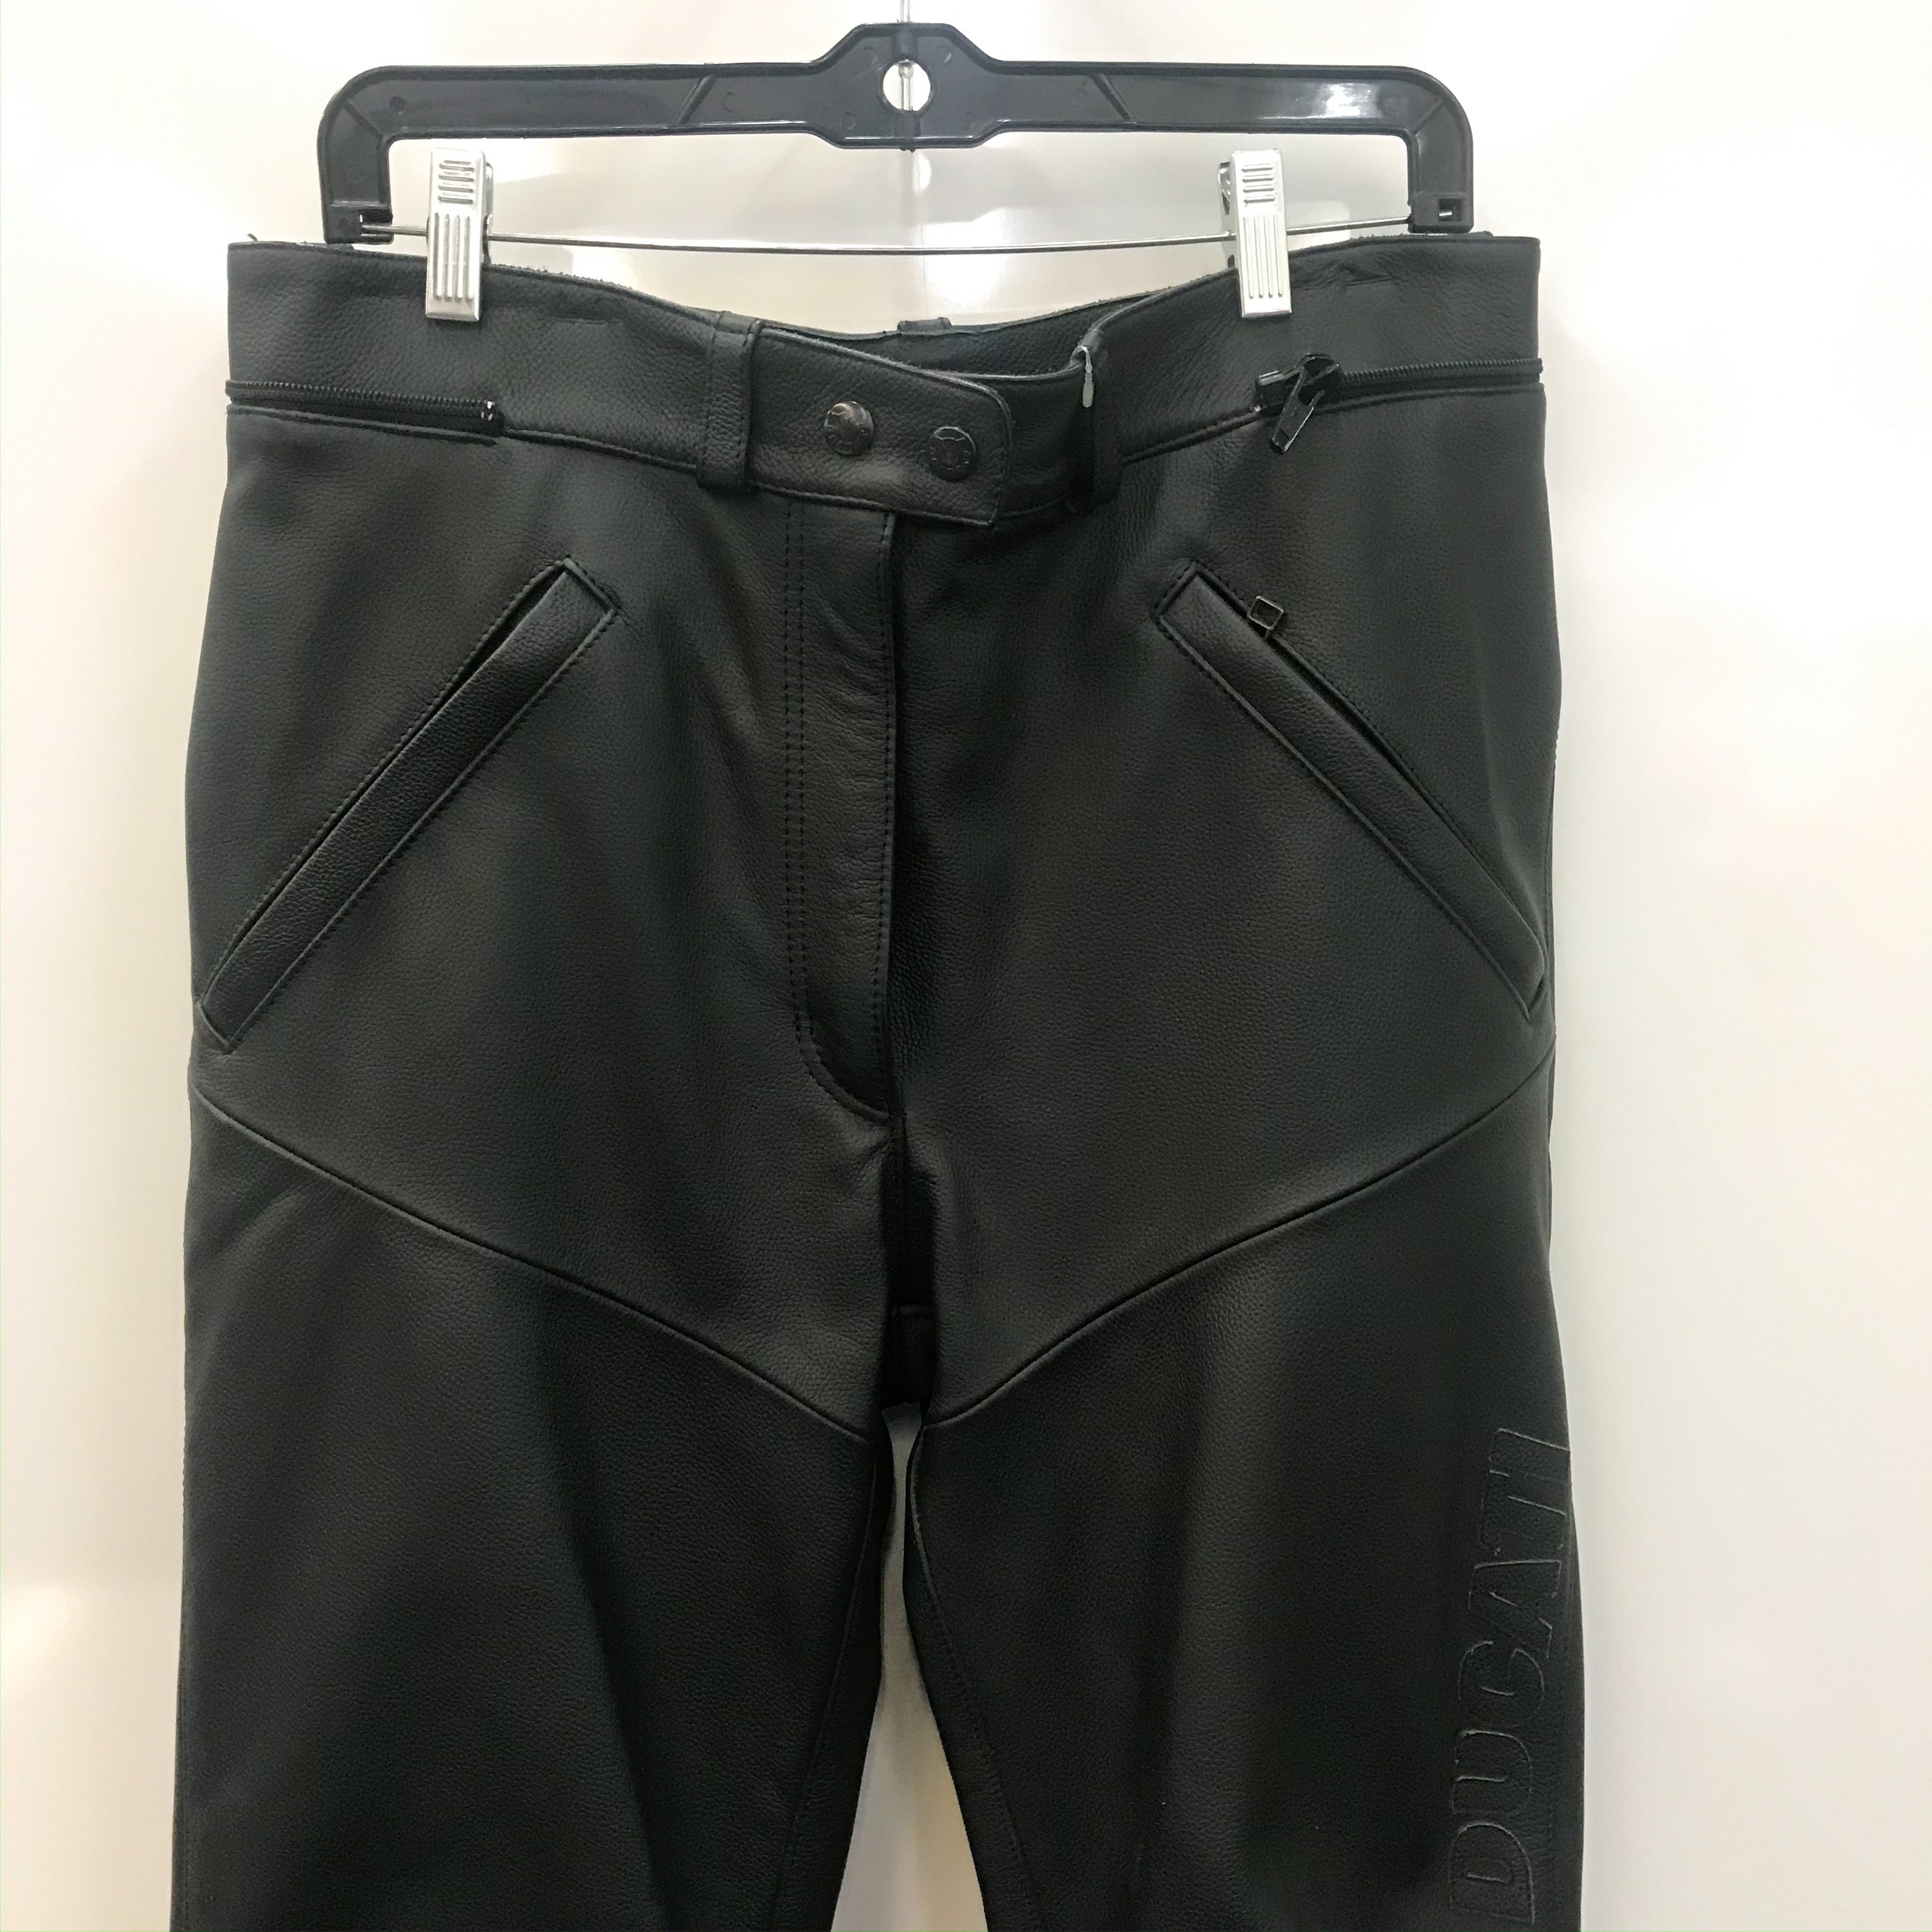 Leather Trousers CE Armored Slider Motorcycle Touring Motorbike Black